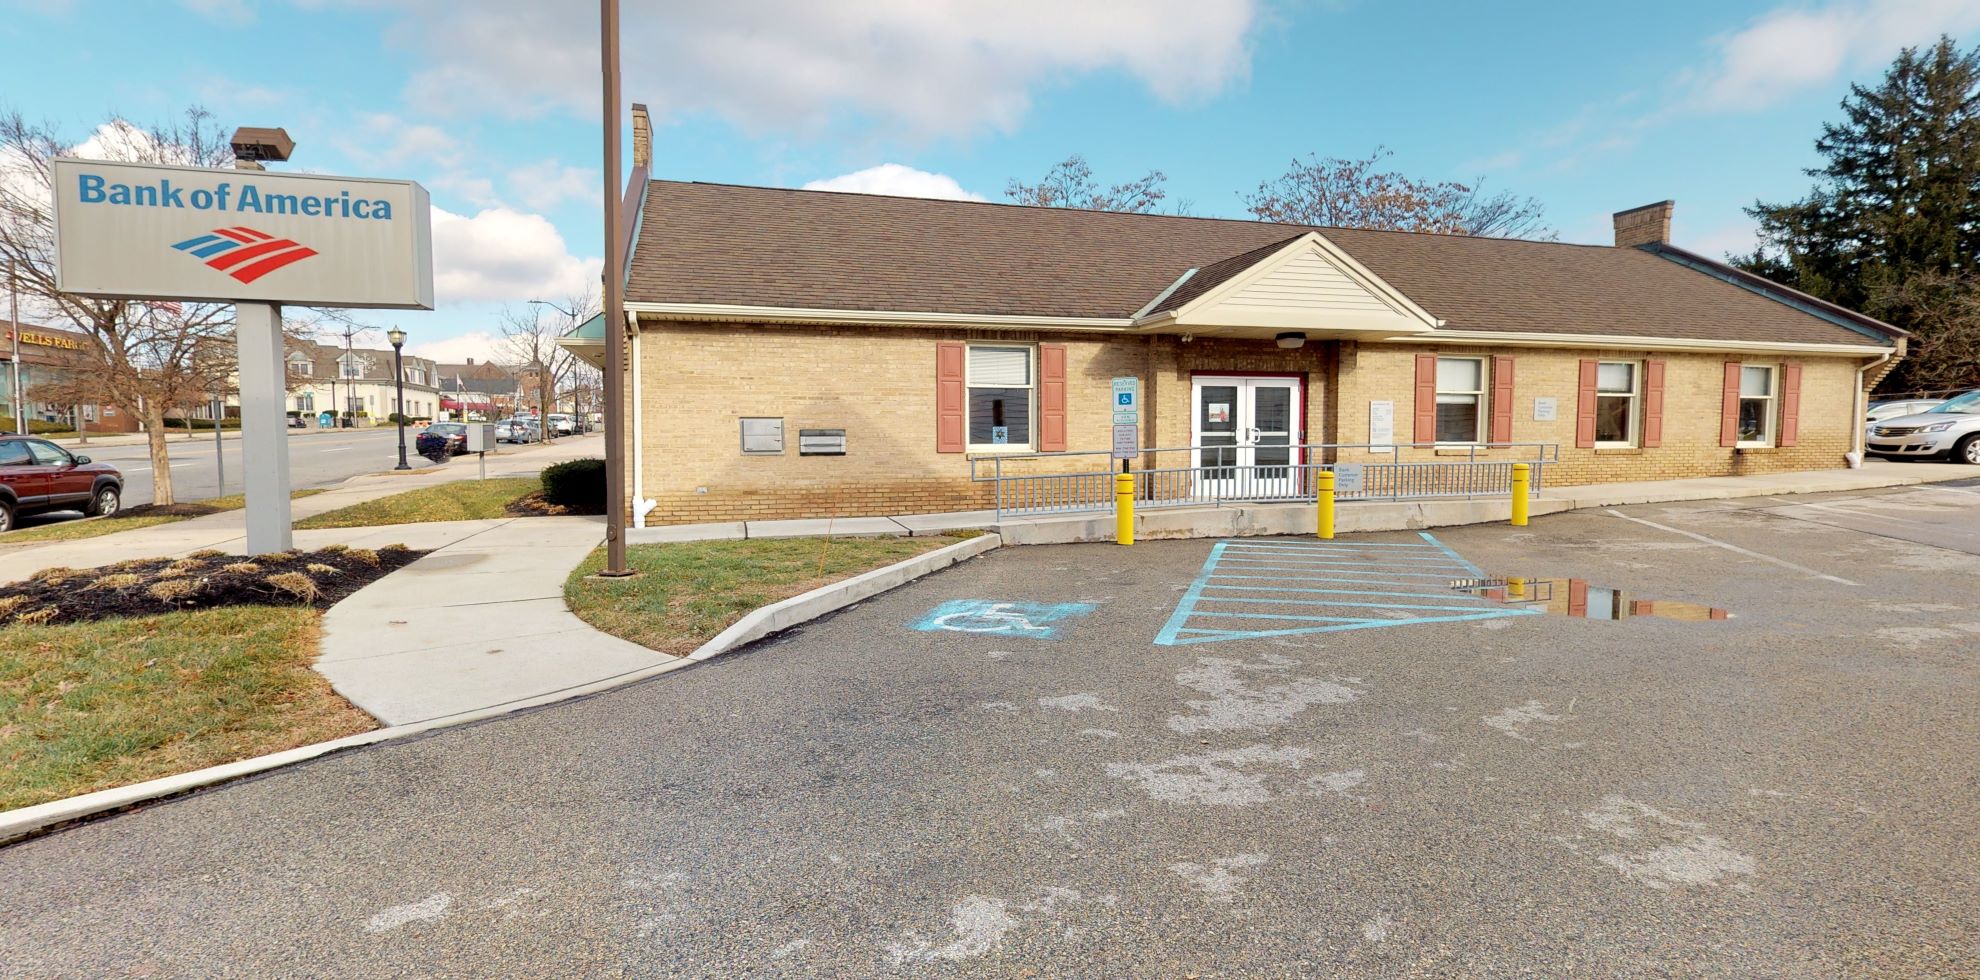 Bank of America financial center with walk-up ATM | 405 Fayette St, Conshohocken, PA 19428